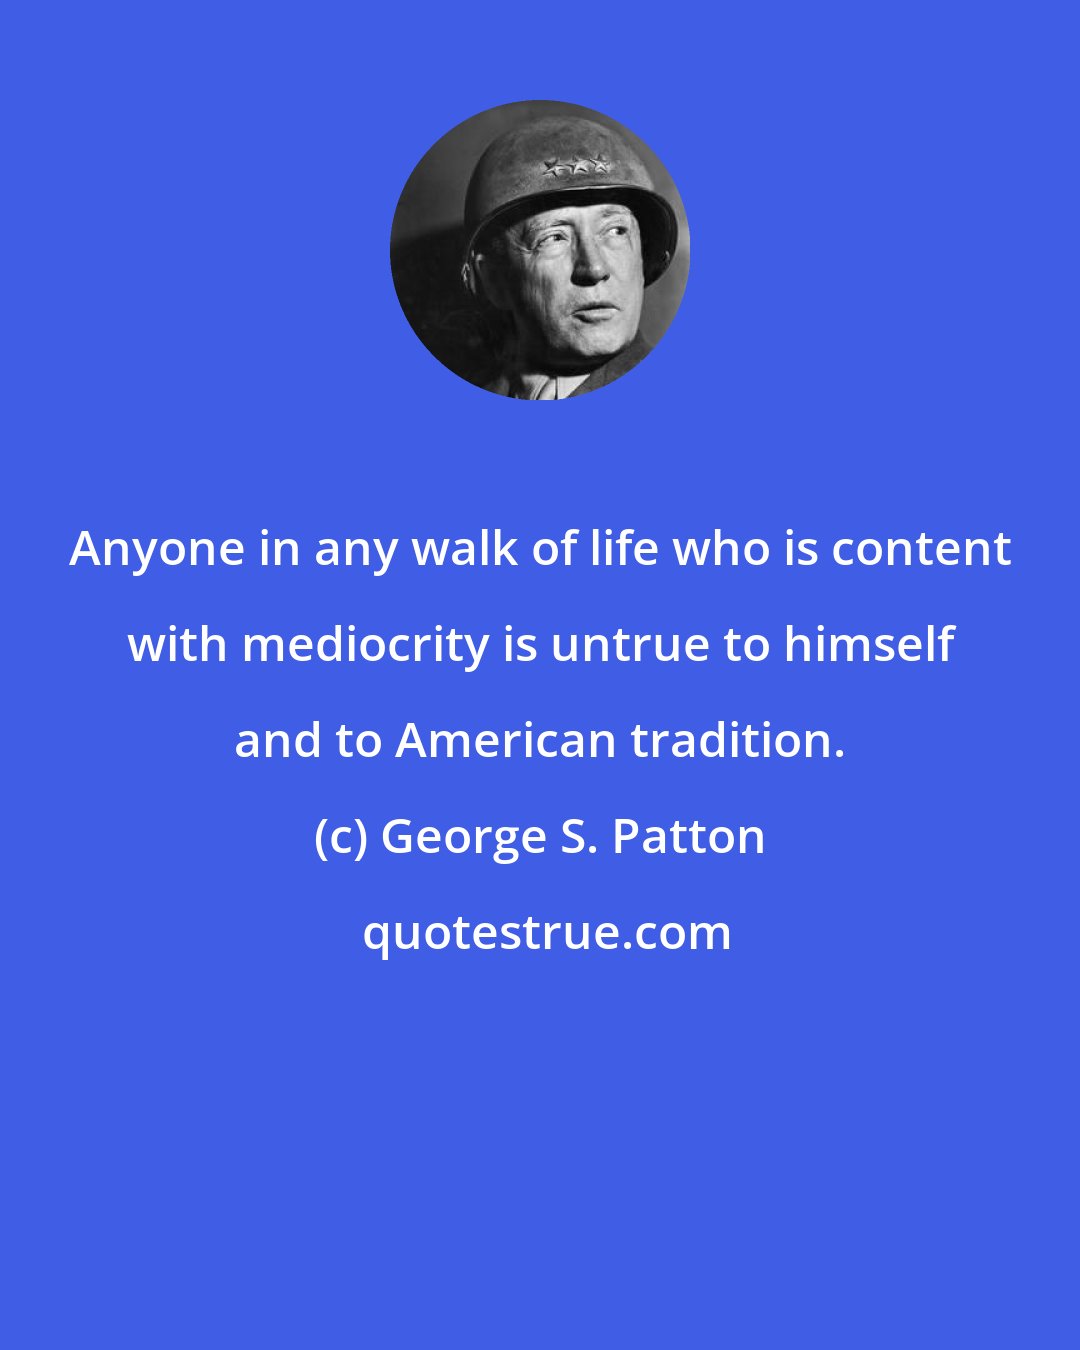 George S. Patton: Anyone in any walk of life who is content with mediocrity is untrue to himself and to American tradition.